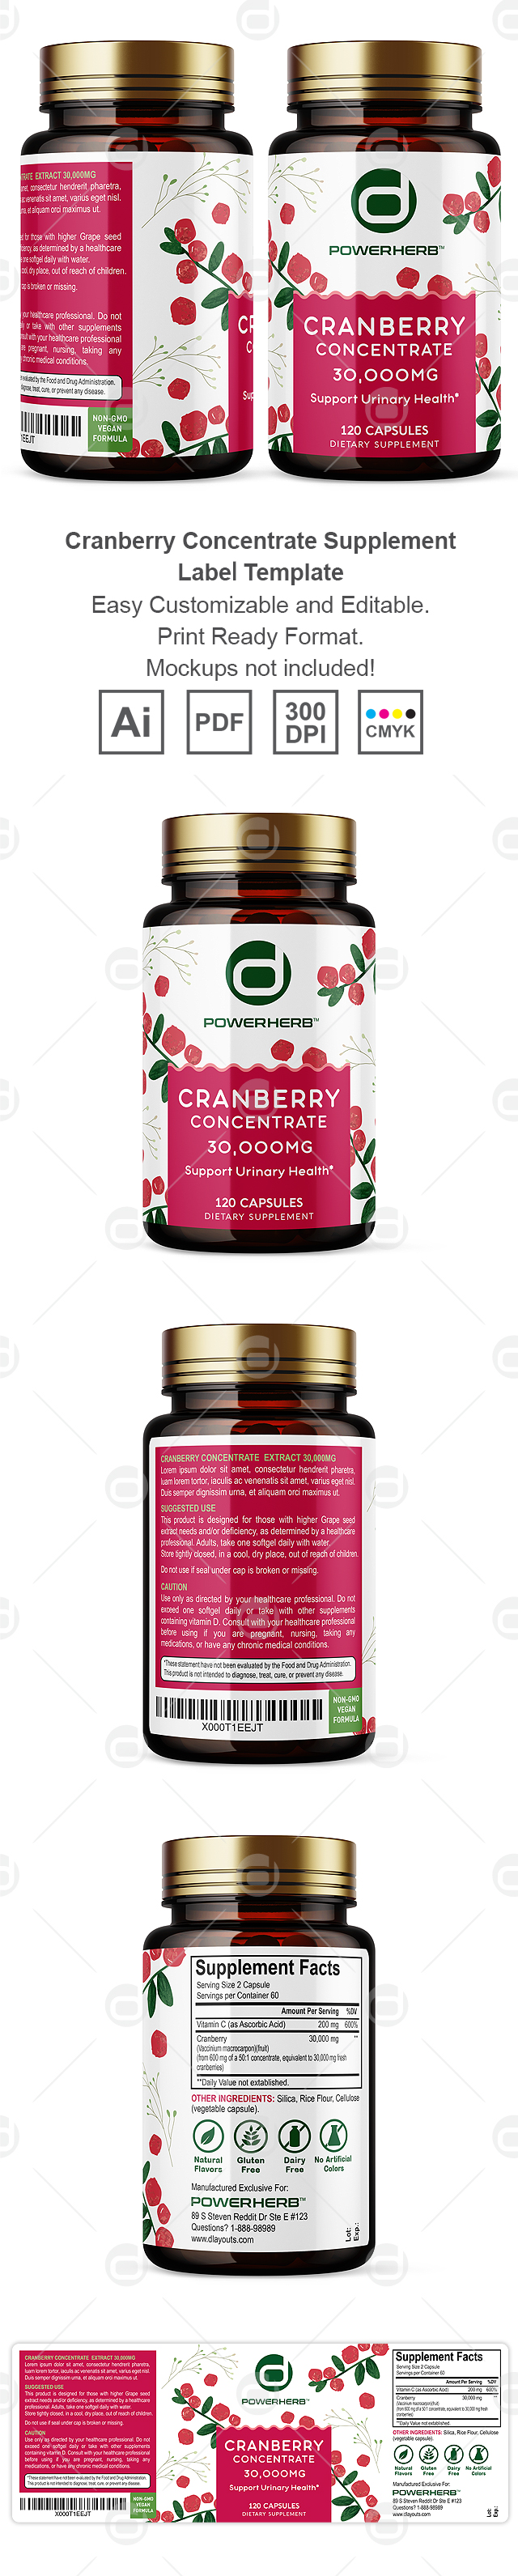 Cranberry Concentrate Extract Supplement Label Template